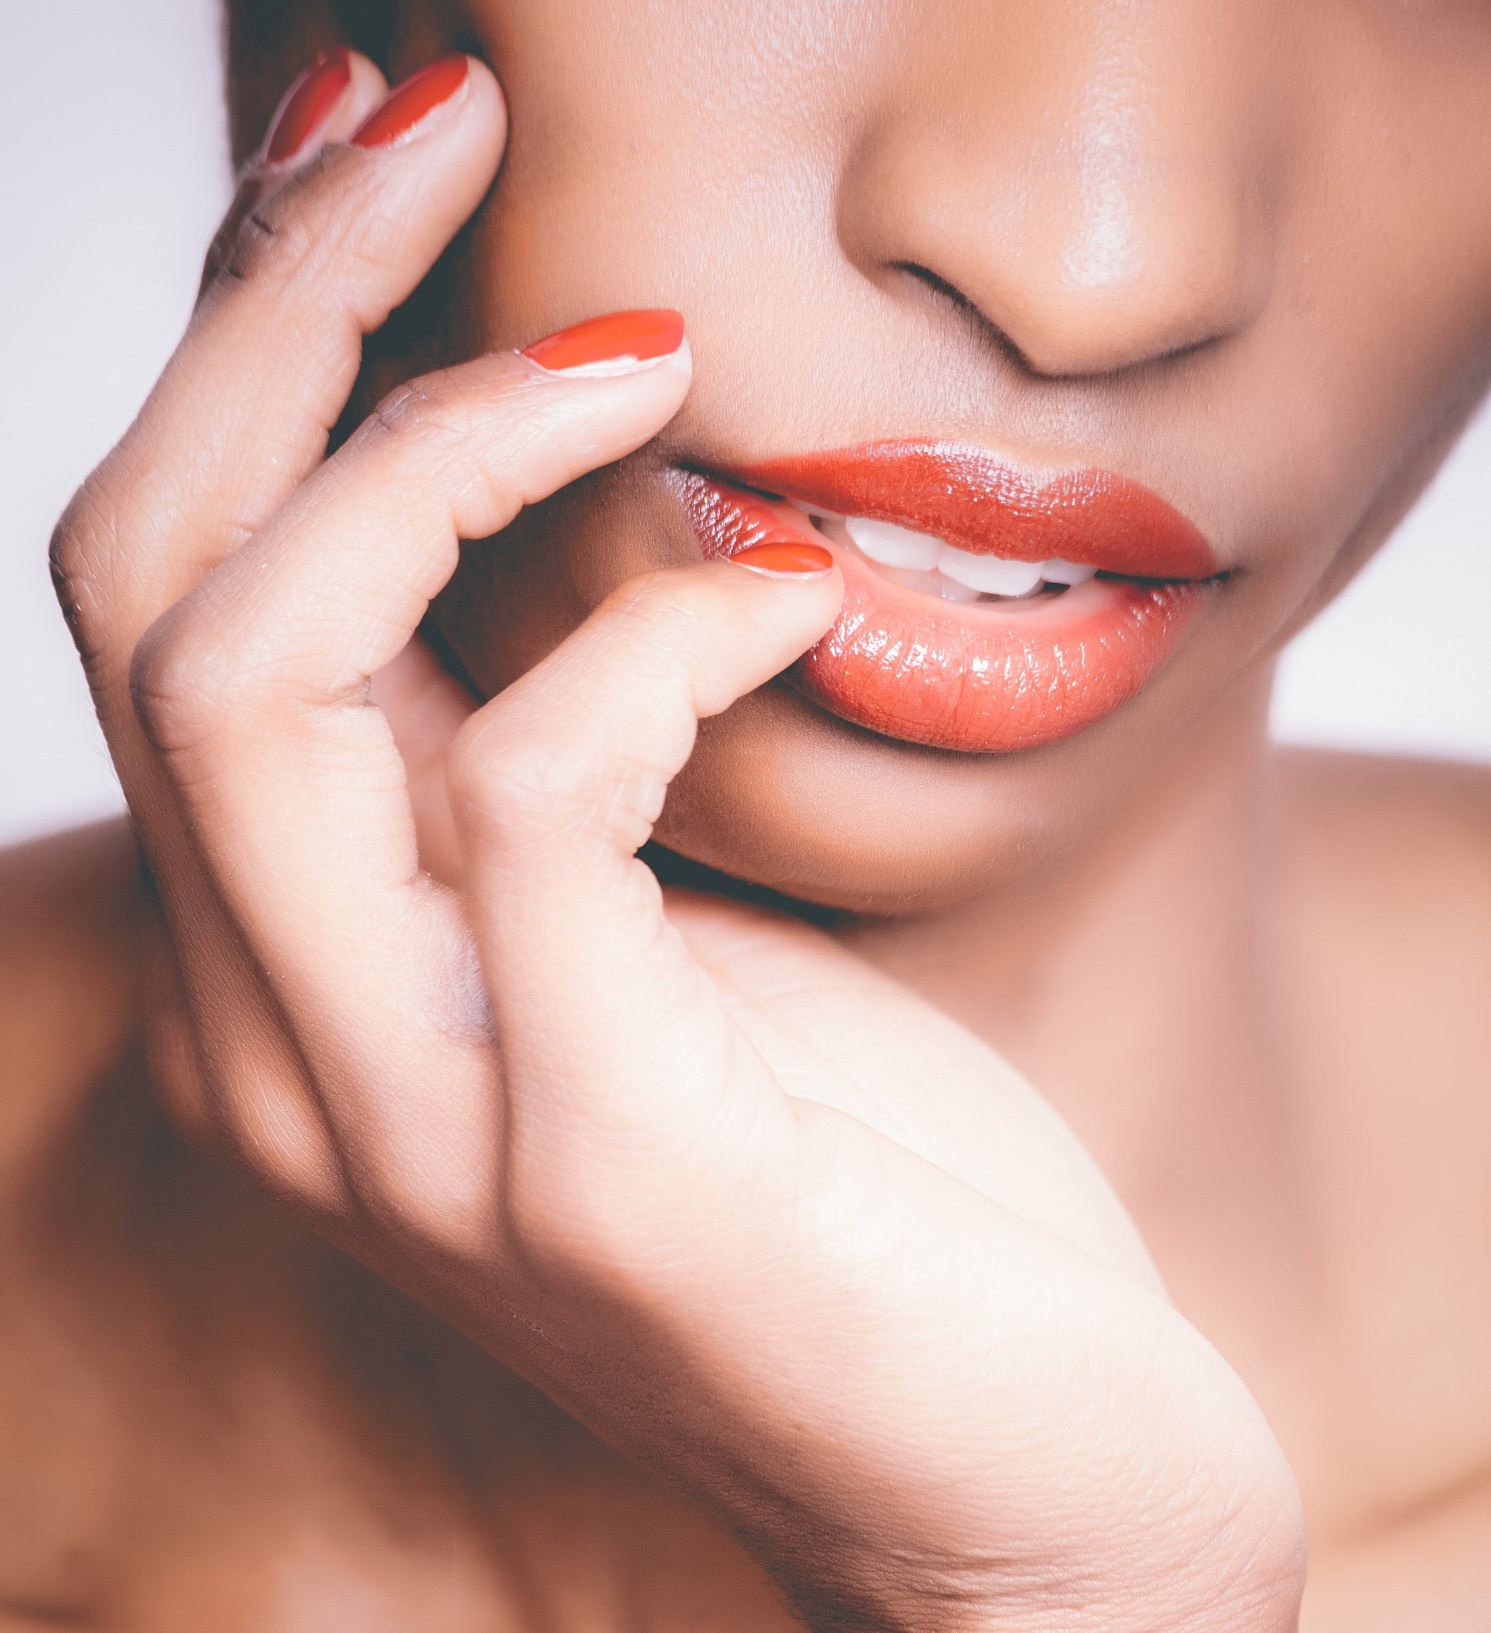 How to enlarge your lips without the help of a syringe? Here are some foolproof tricks